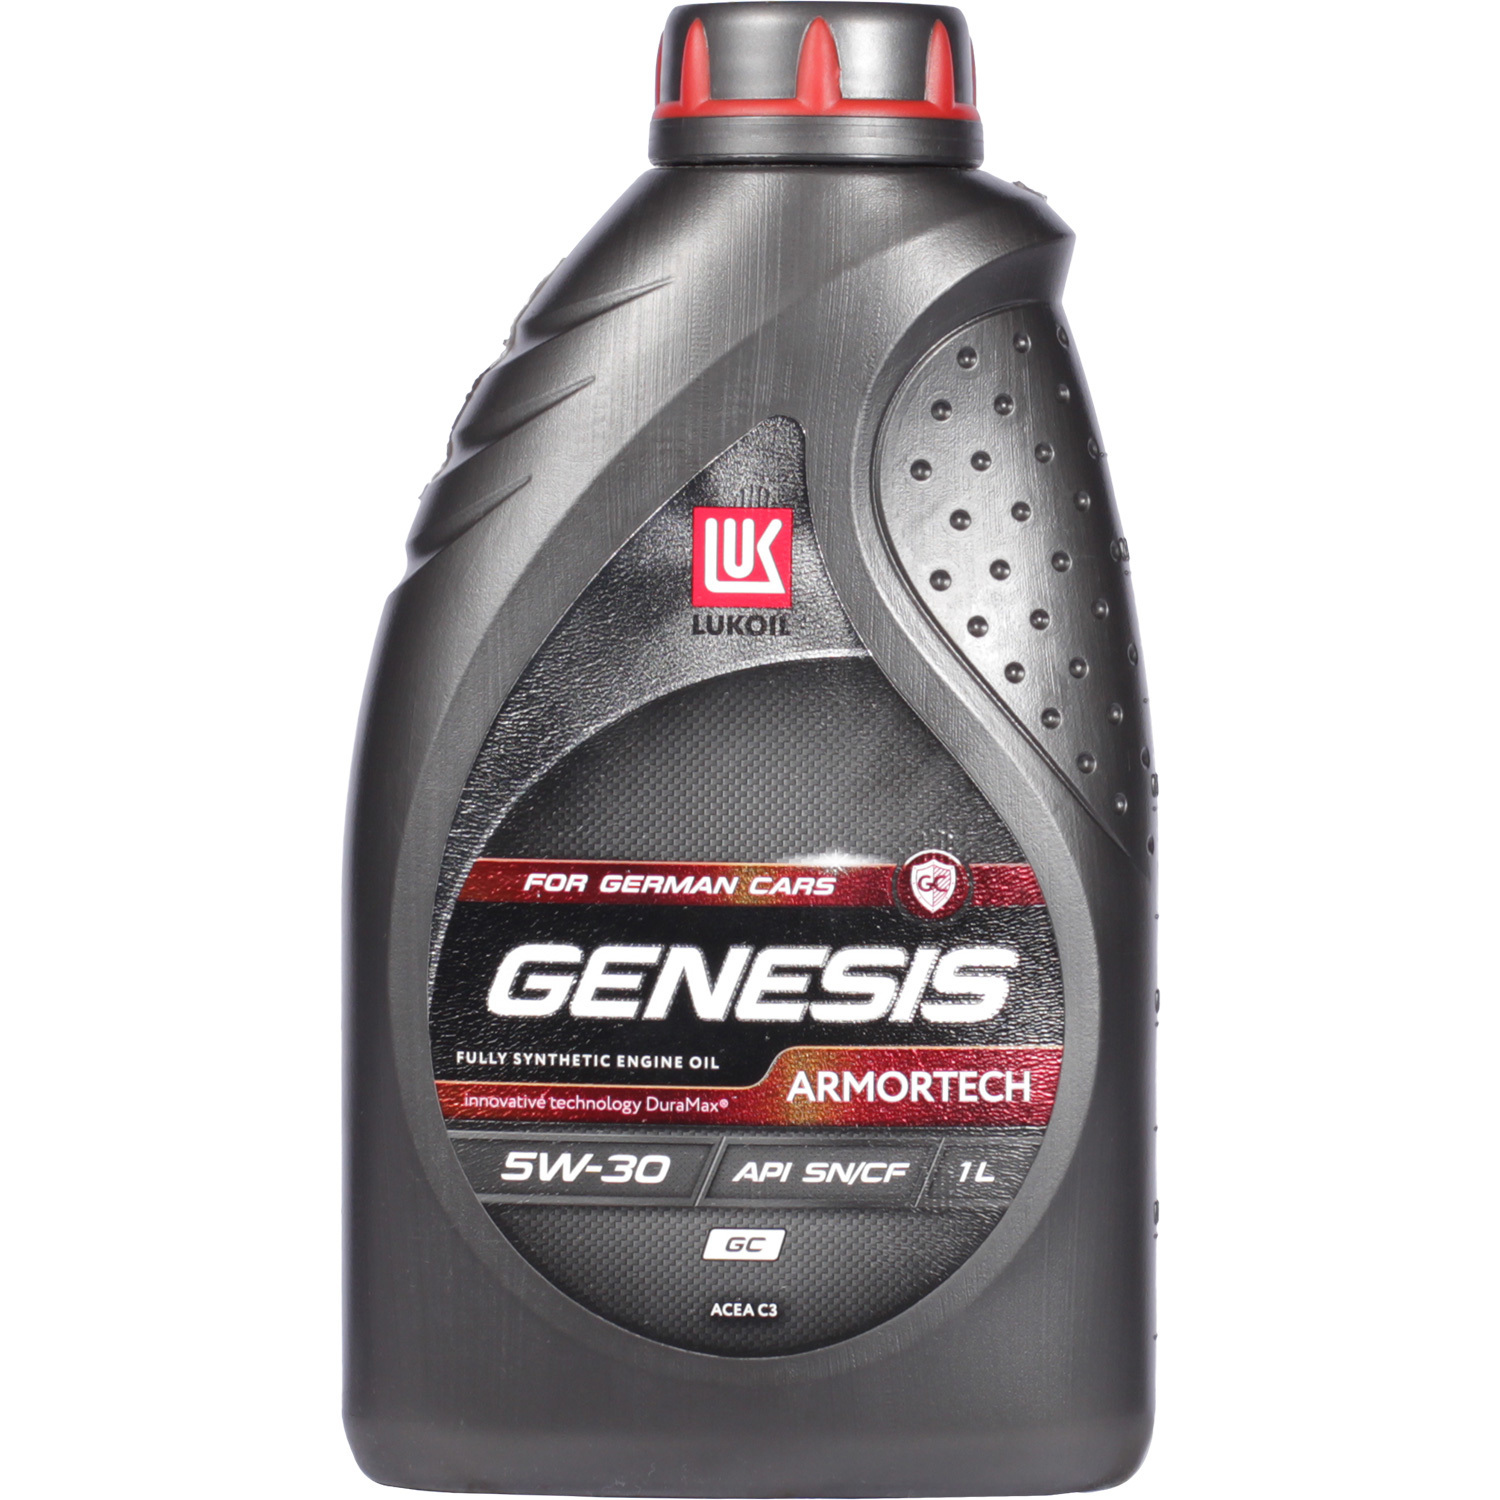 Lukoil Моторное масло Lukoil Genesis Armortech GC 5W-30, 1 л lukoil моторное масло lukoil genesis armortech 5w 40 4 л